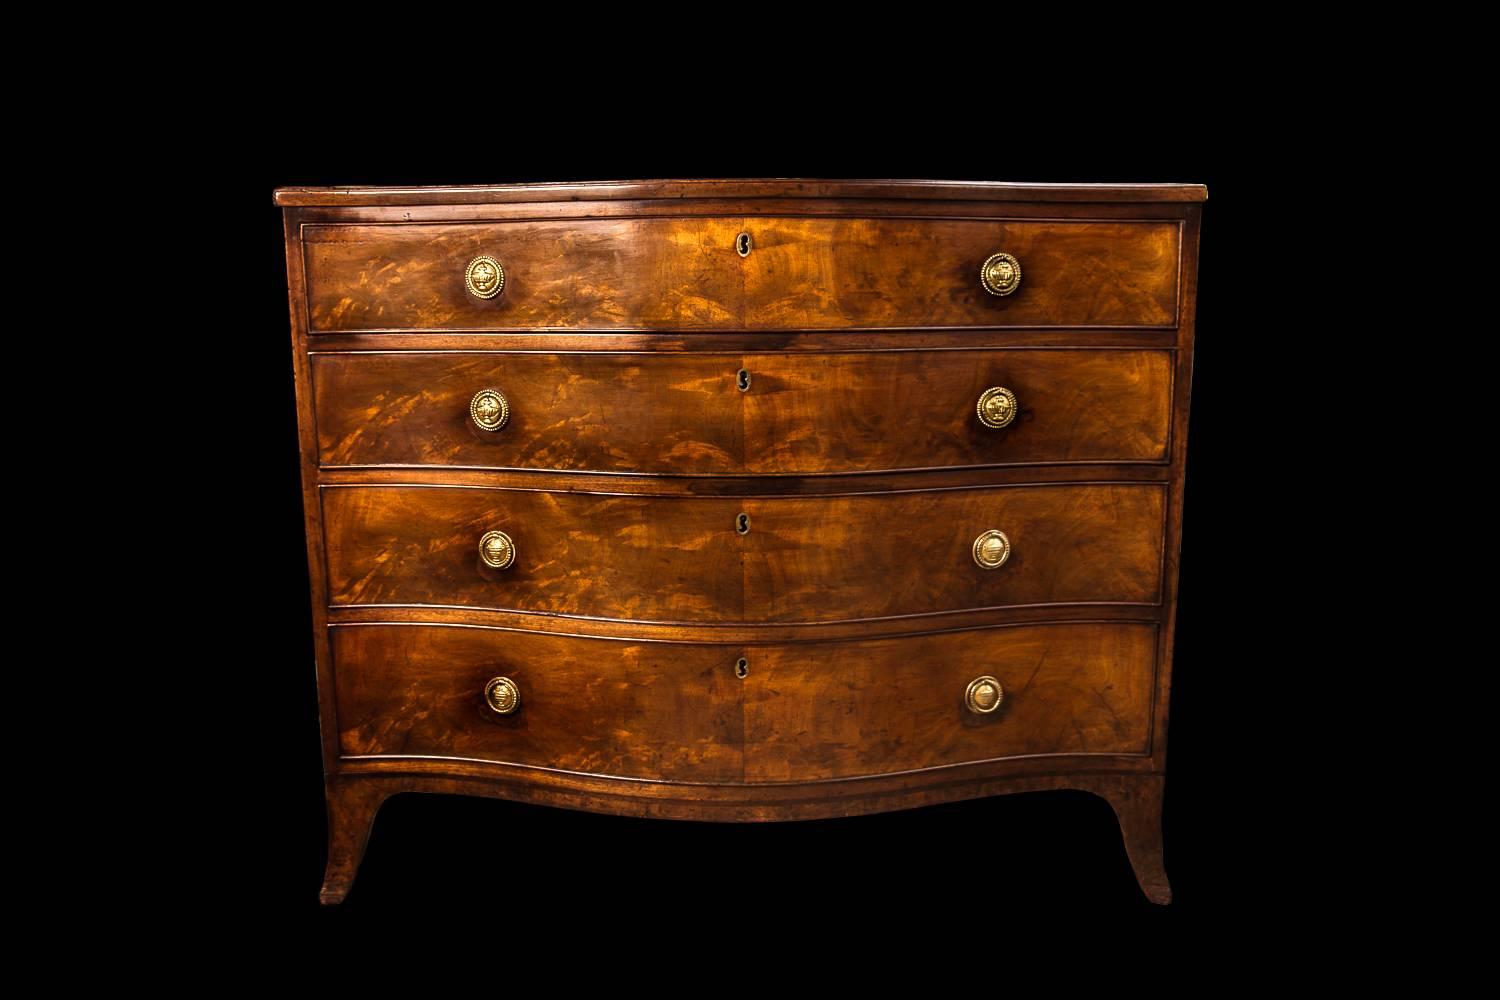 The serpentine rectangular moulded top above four graduated drawers, on gently splayed feet with S-pattern keyholes, the handles old but not original, all four drawers fully lined in cedar.

The use of S-pattern keyholes is seen on work by leading